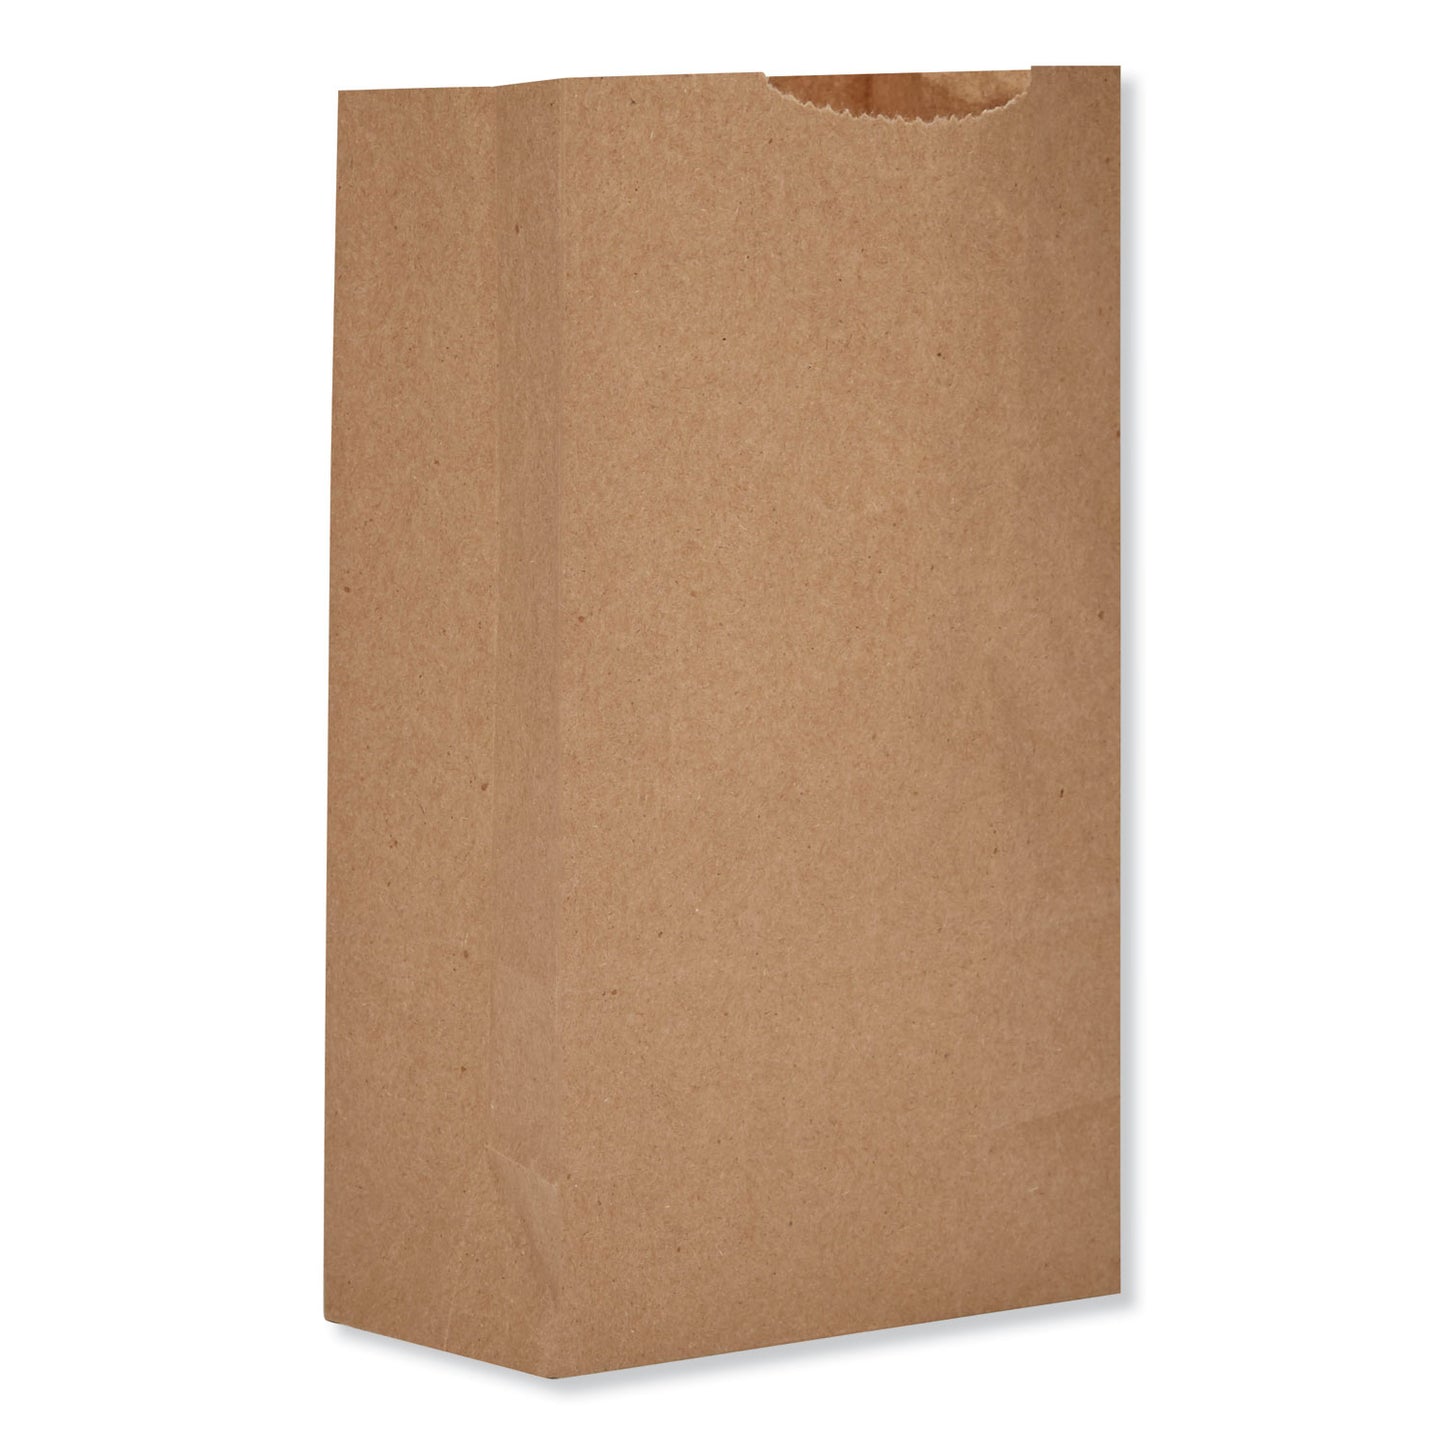 #2 Grocery Bags 4.06x2.68x8.12in (500 Count)